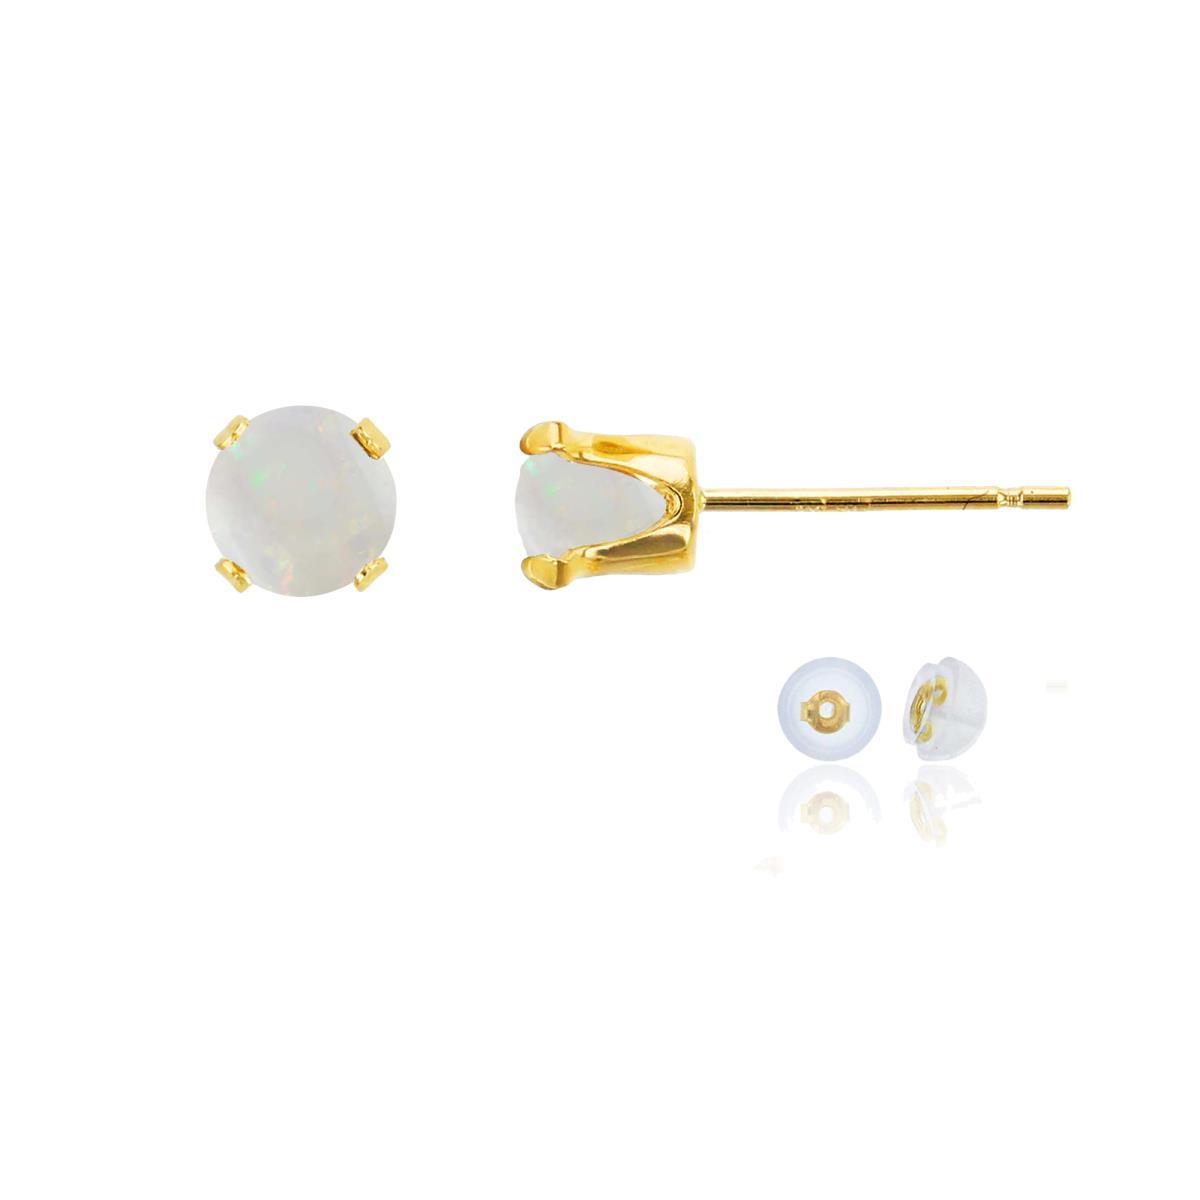 10K Yellow Gold 5mm Round Opal Stud Earring with Silicone Back